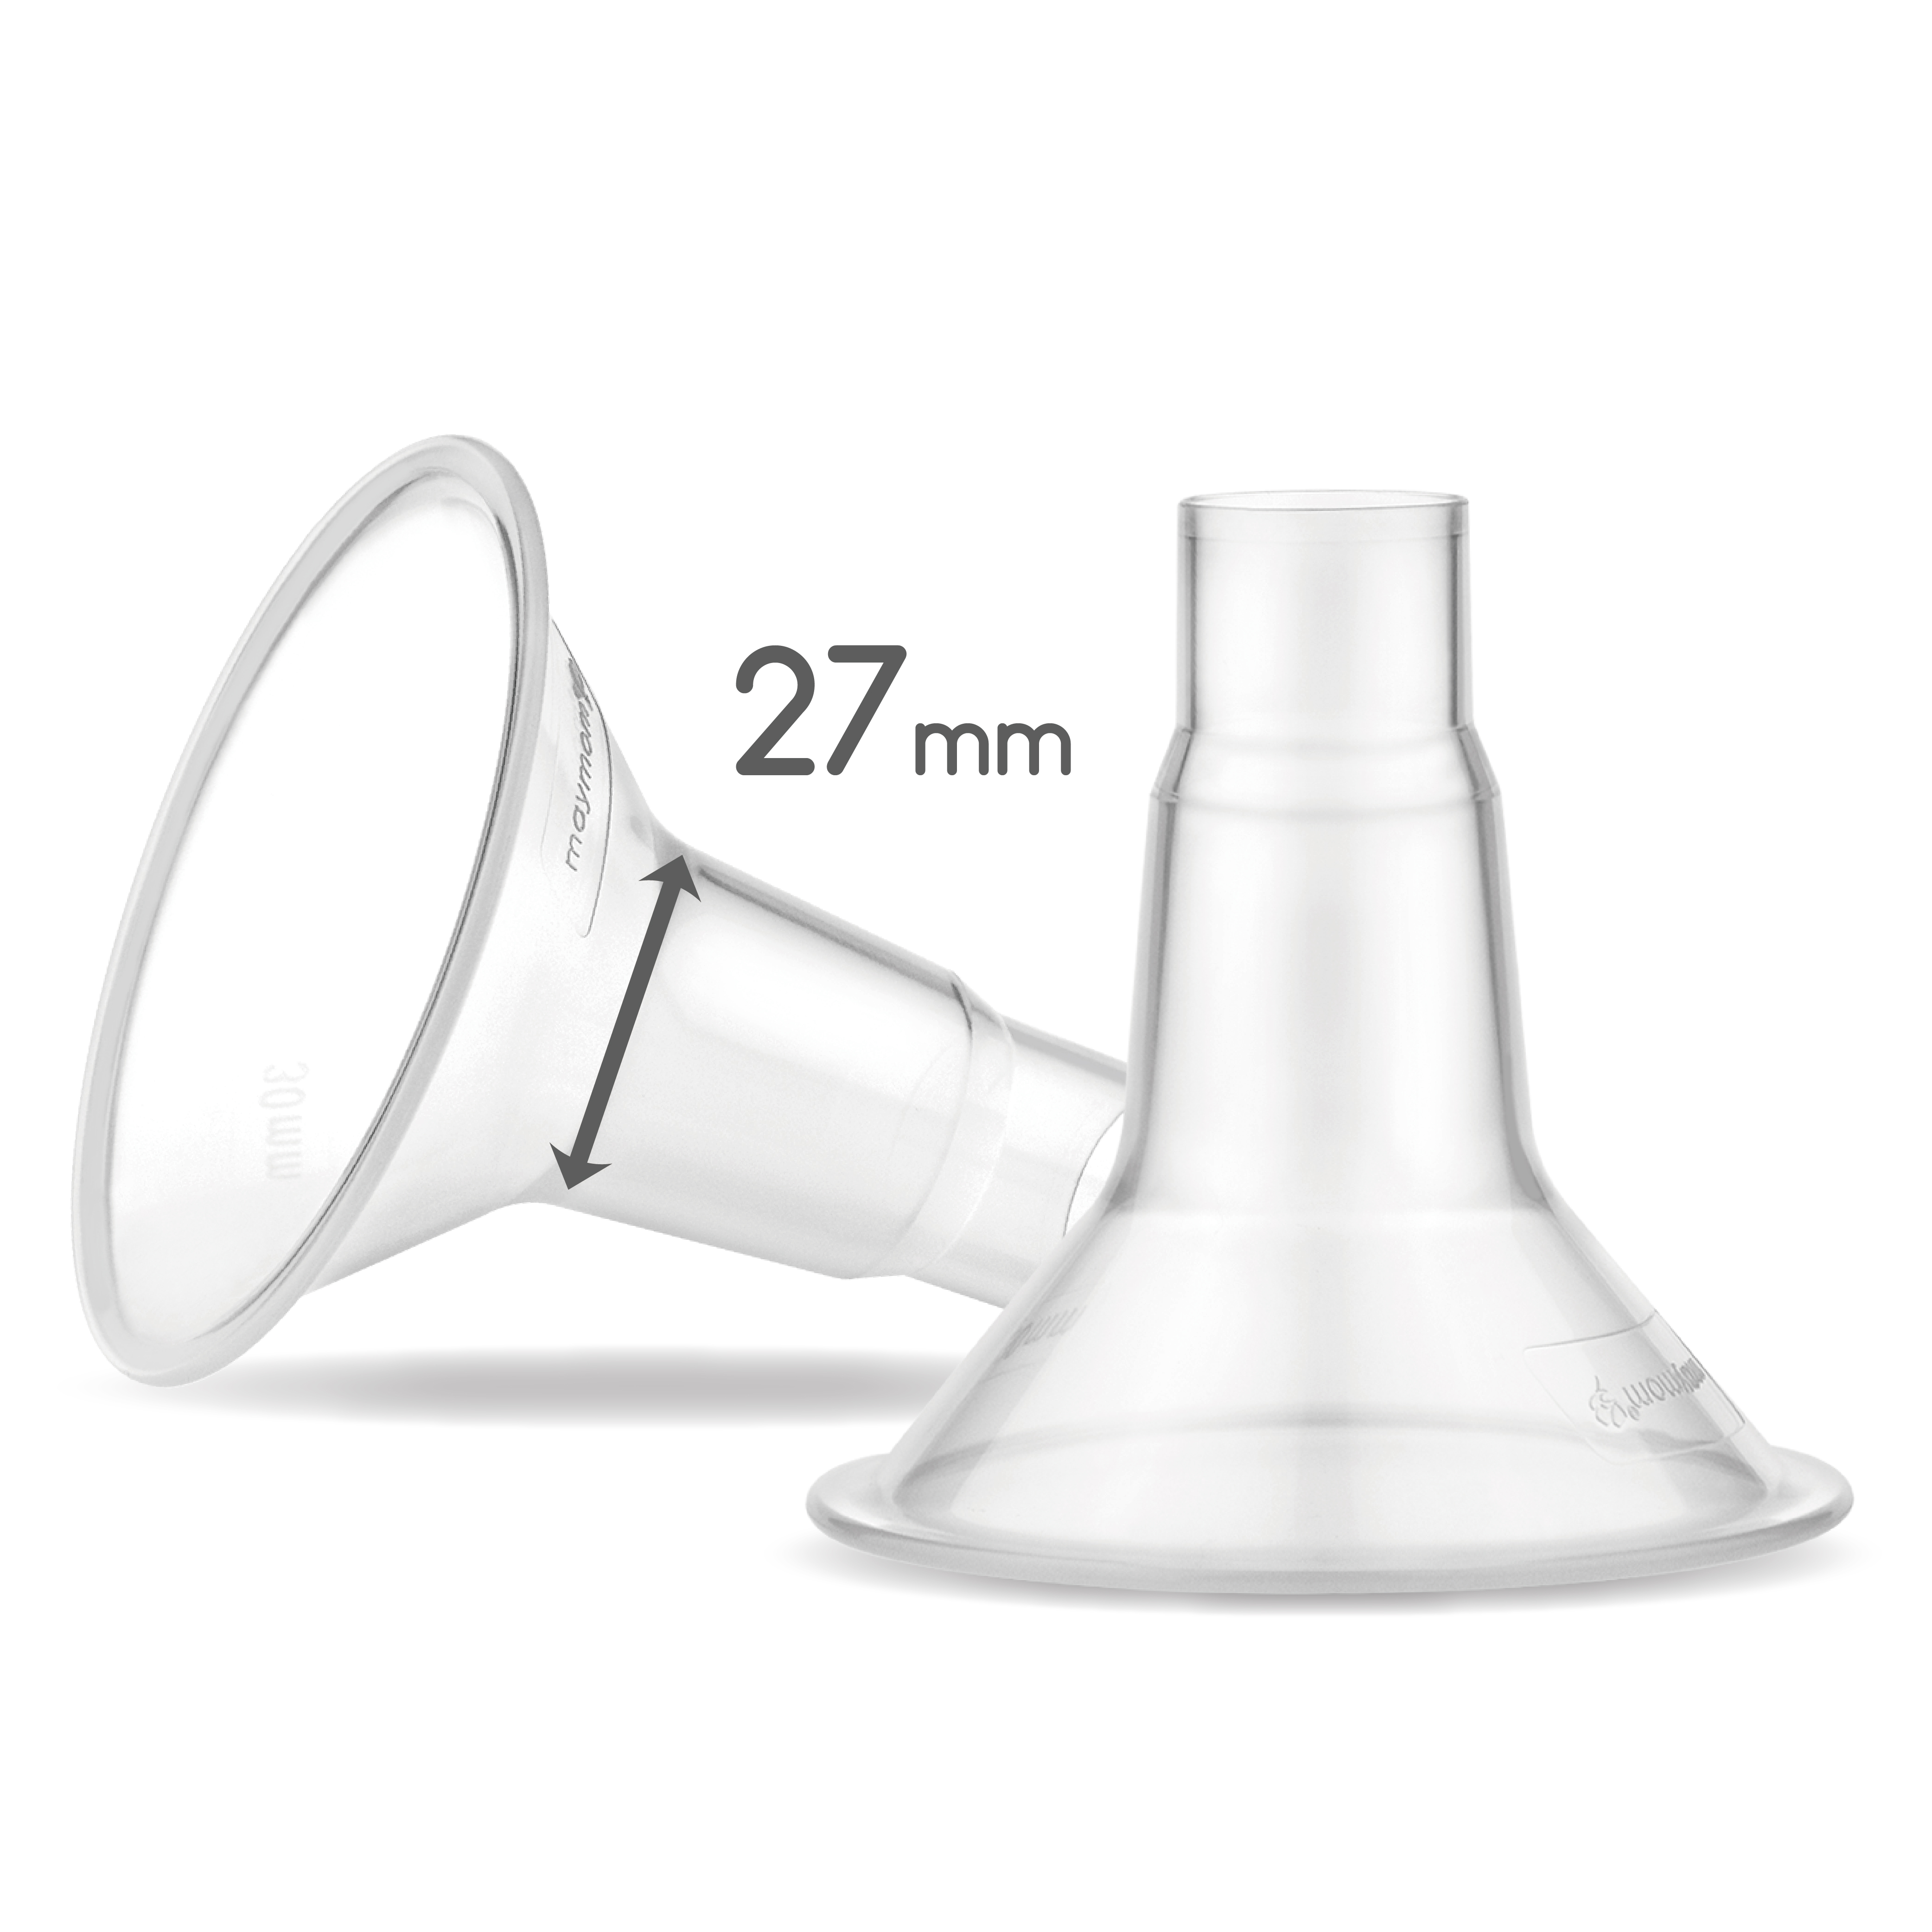 MyFit 27 mm Shield; Compatible with Medela Breast Pumps Having PersonalFit, Freestyle, Harmony, Maxi Connector; Connects; 2pc